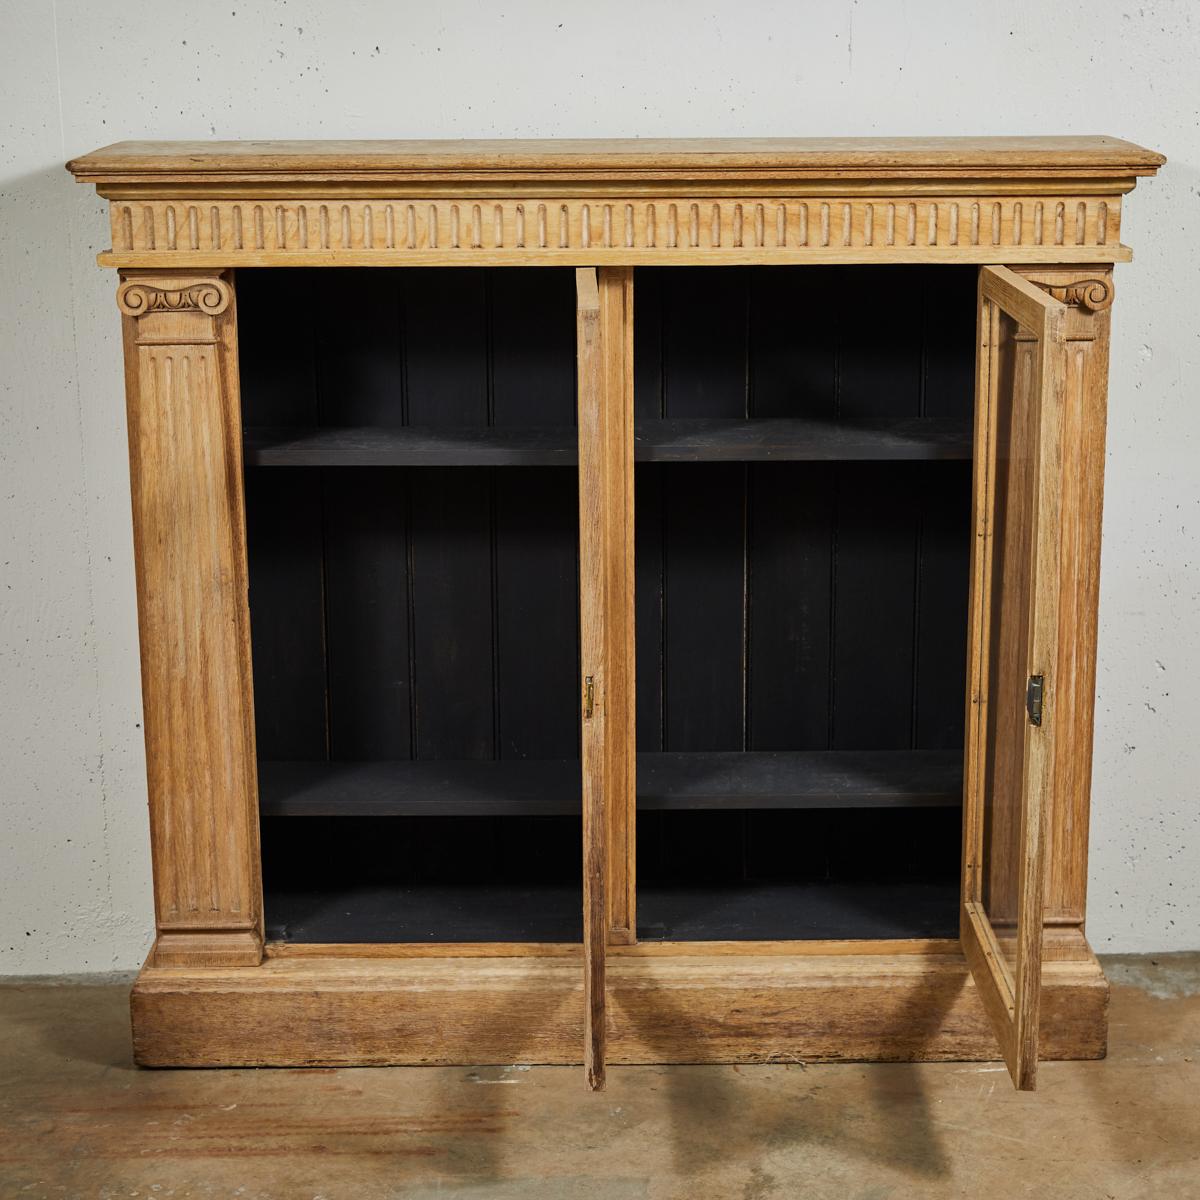 Late 19th-century English bleached oak bookcase with glass doors. Features hand-carved ionic pilaster detailing in natural oak with a stunning blond patina. The interior is painted black and visible through the glass doors. A perfect showcase for